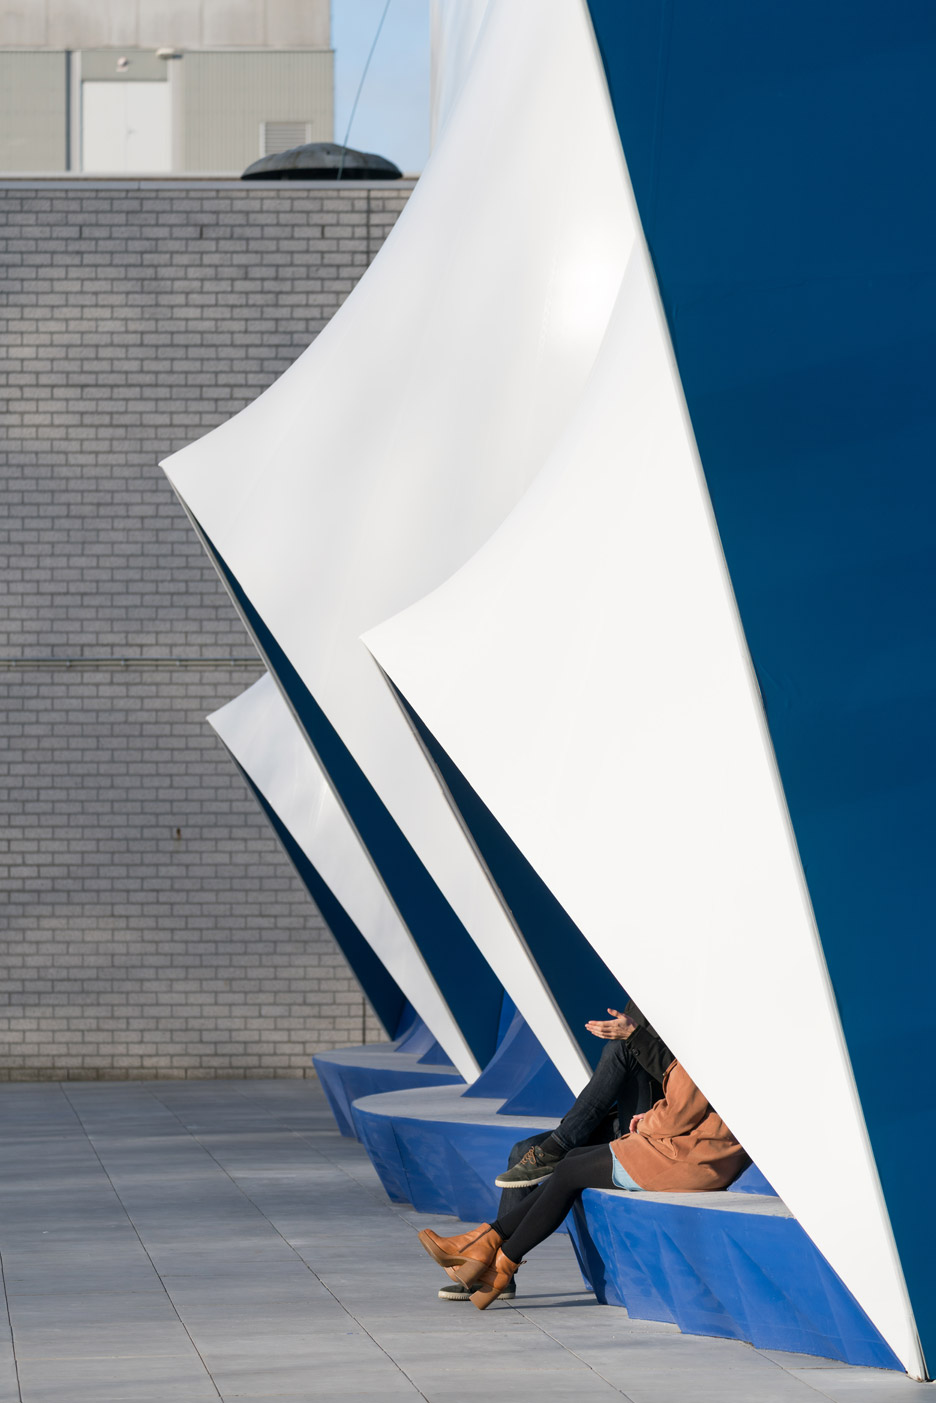 3D printed facade for EU building by Heijmans and DUS Architects